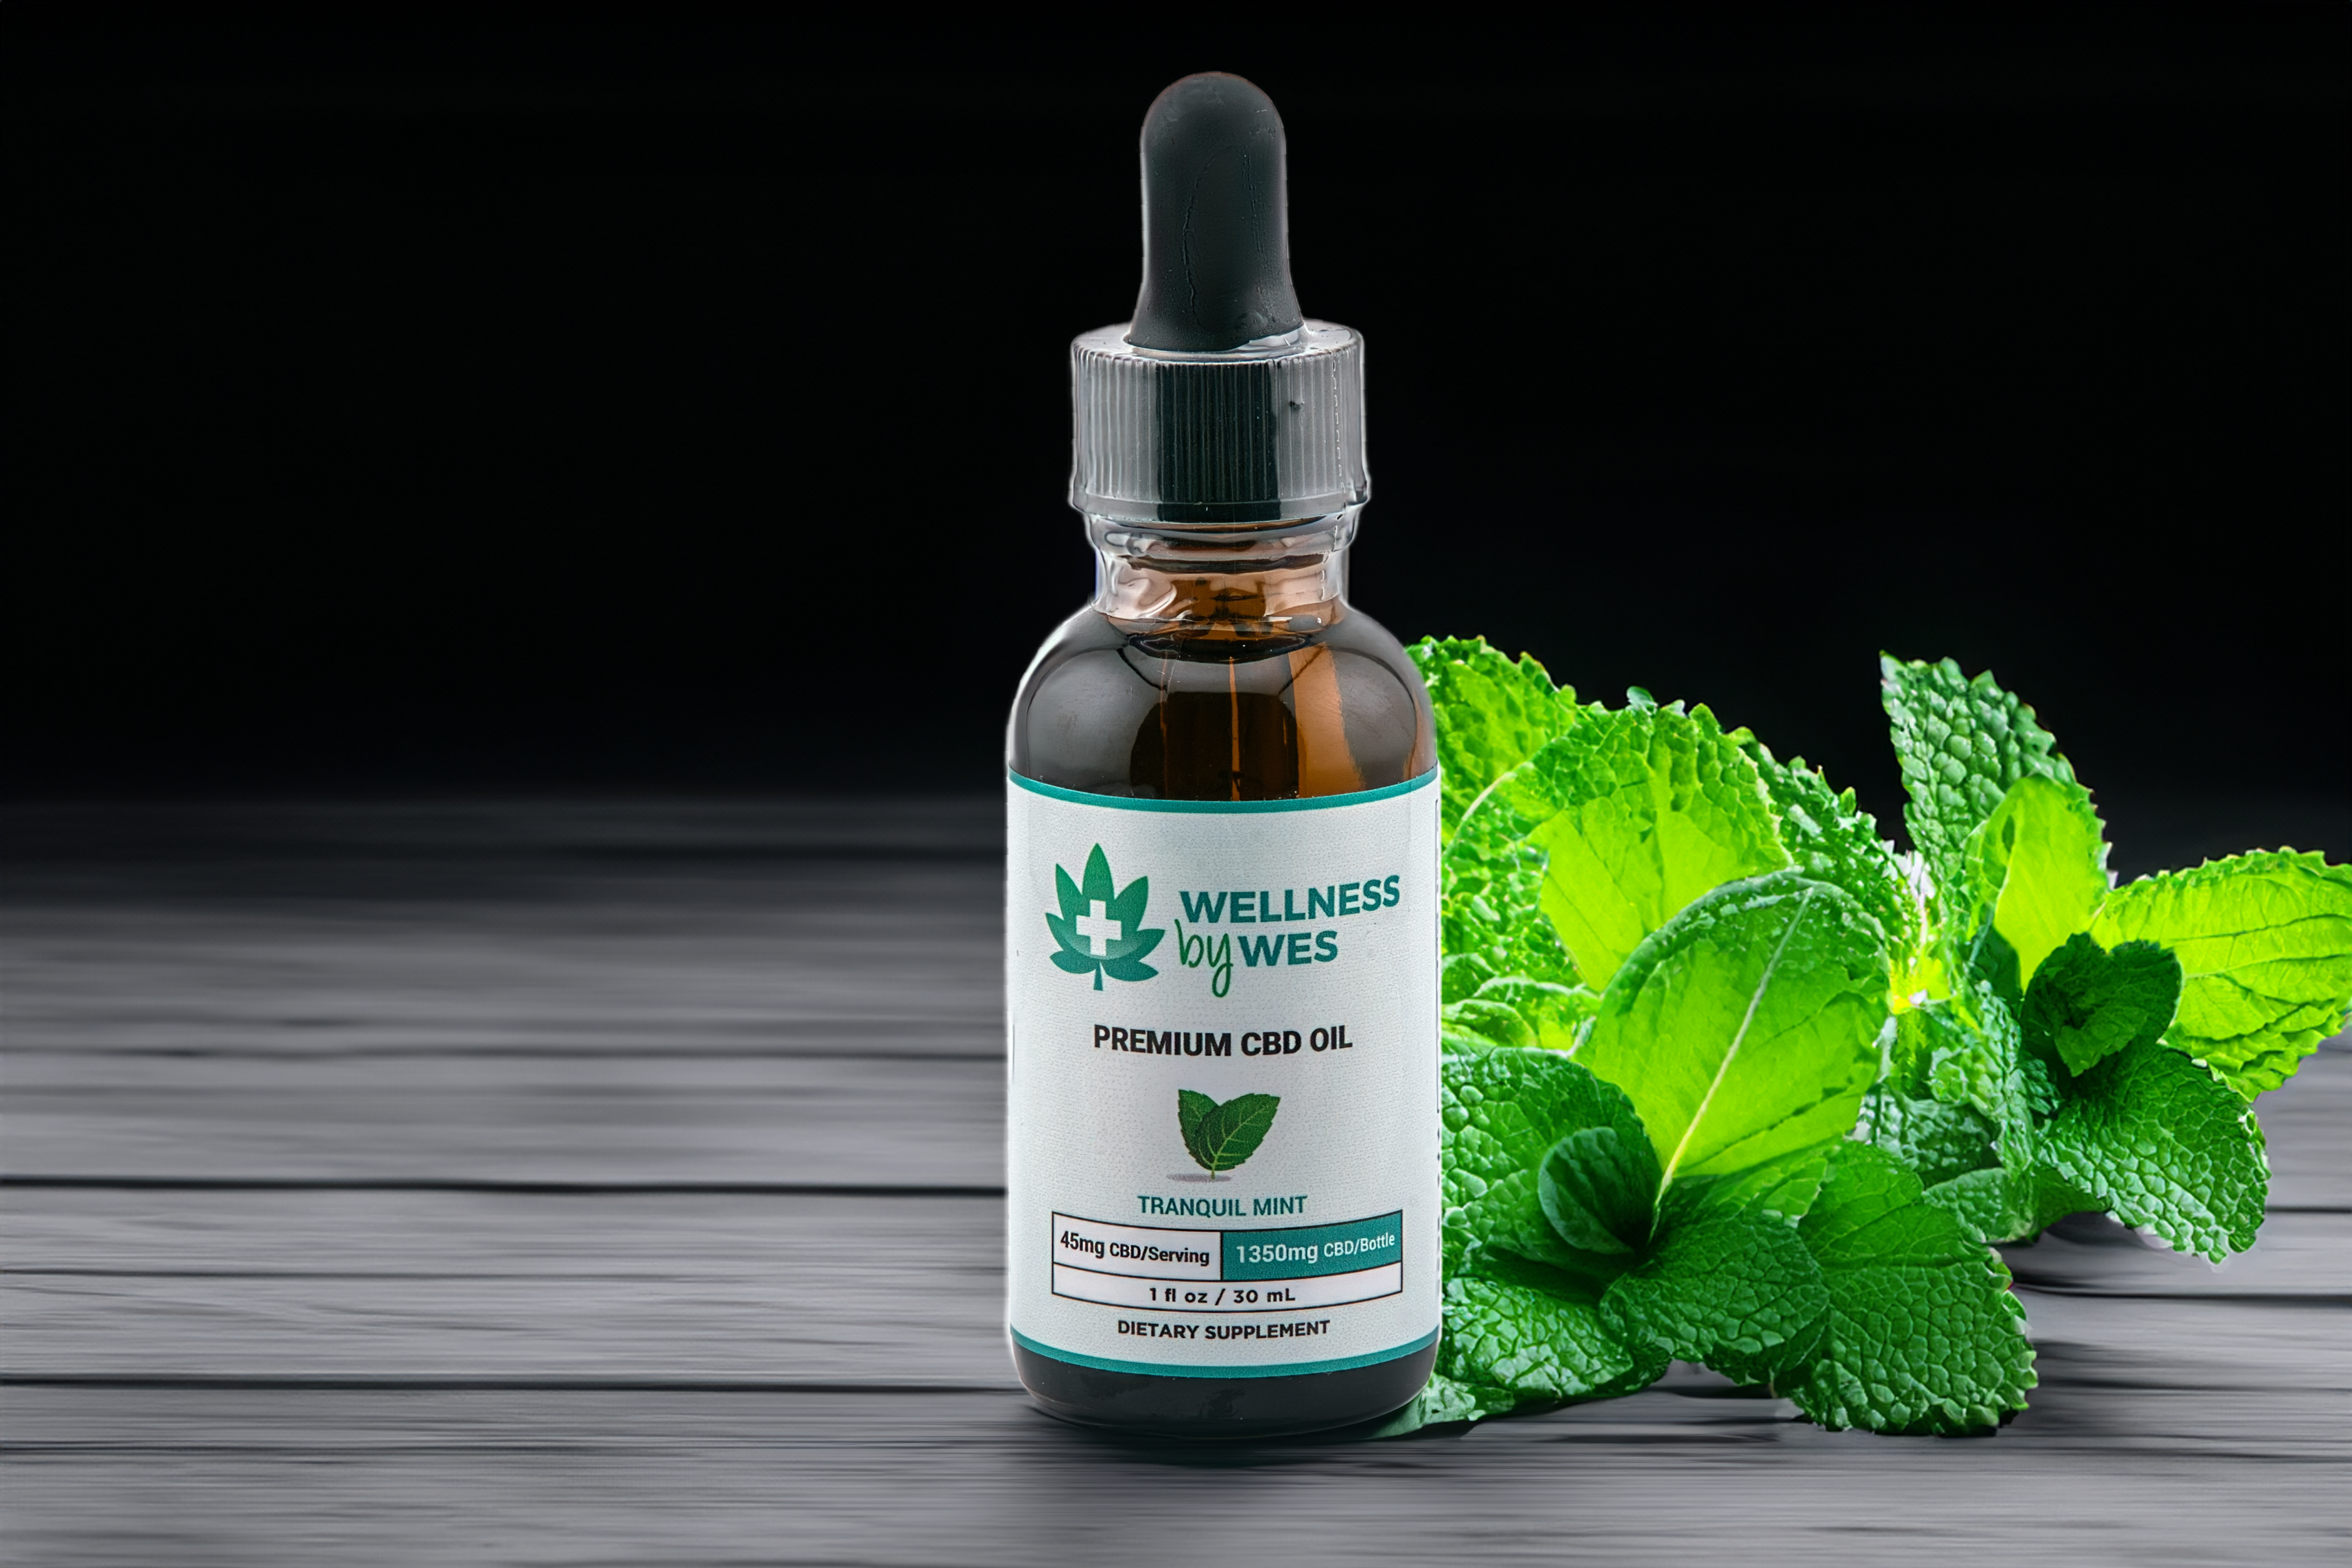 Wellness by Wes Tranquil Mint CBD Oil Tincture, with vibrant green mint leaves in the background, suggesting a refreshing flavor and natural ingredients.